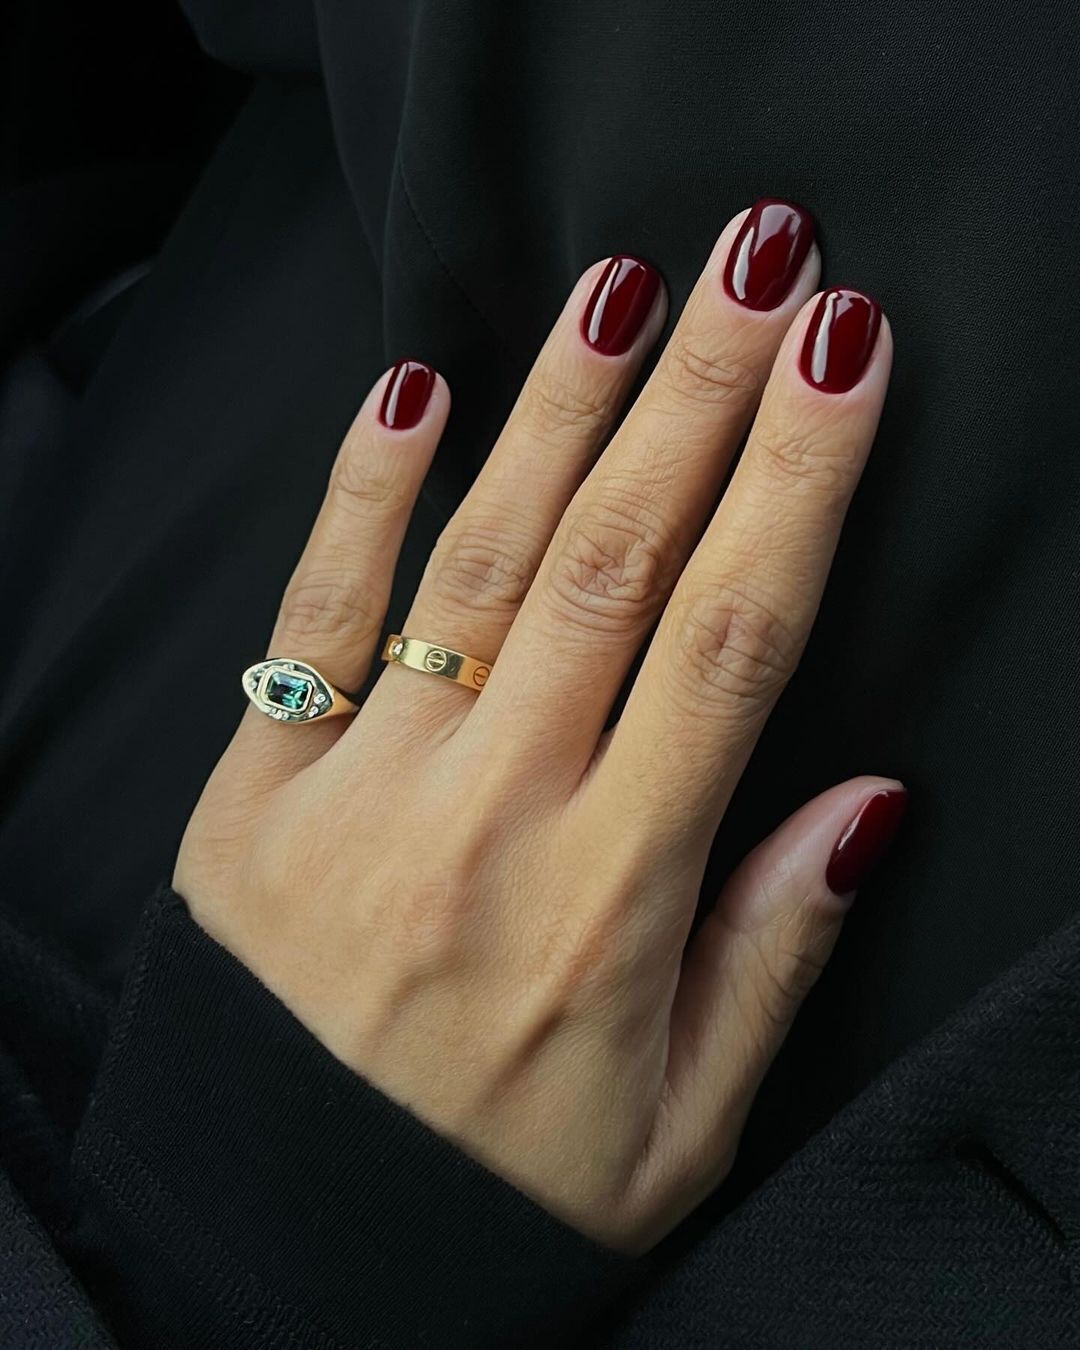 6 elegant nail colors that will never go out of style and suit all women